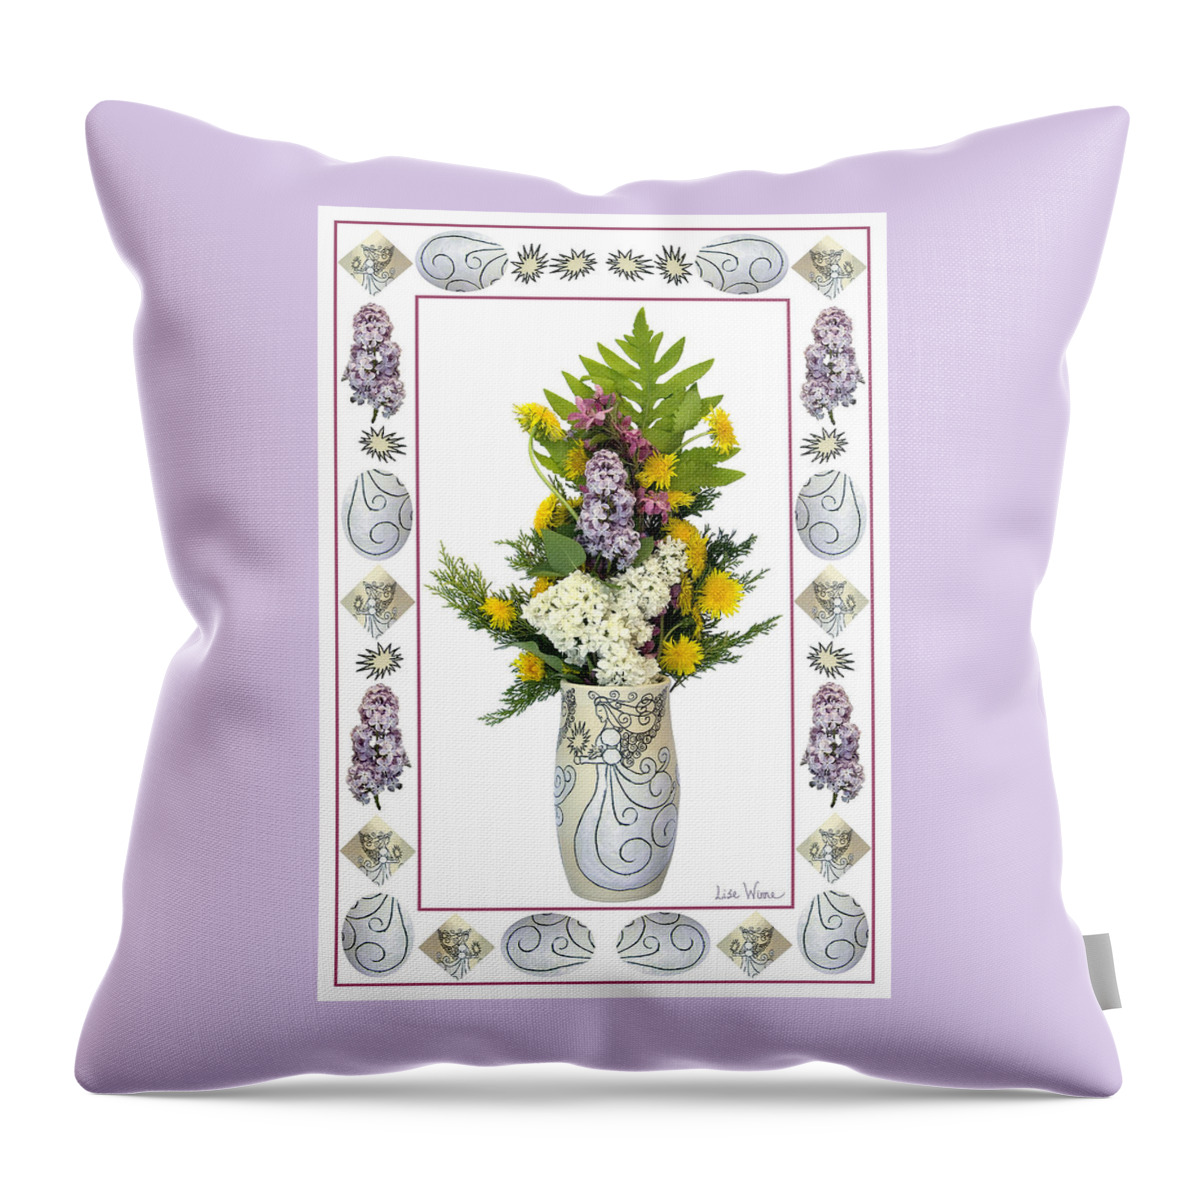 Vase By Lise Winne Throw Pillow featuring the photograph Star Vase with a Bouquet From Heaven by Lise Winne